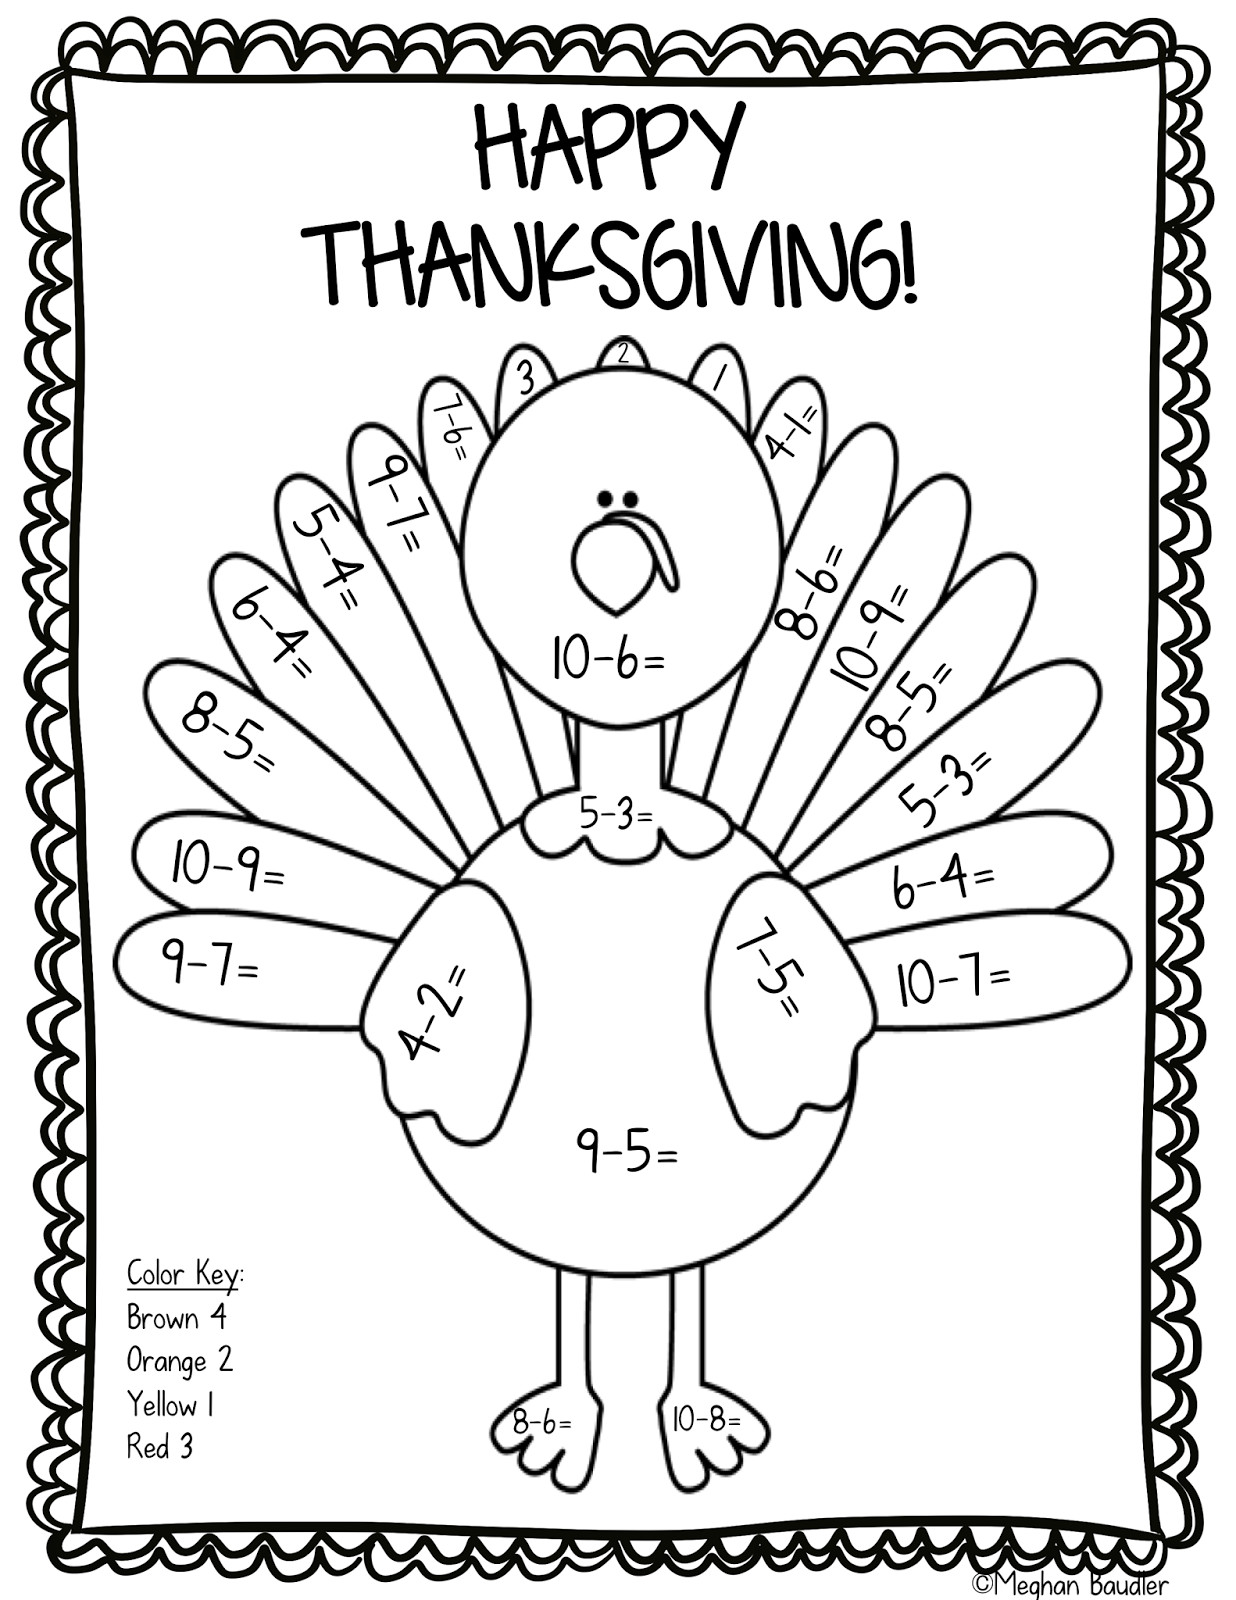 Activities For Thanksgiving
 The Creative Colorful Classroom Thanksgiving Activities